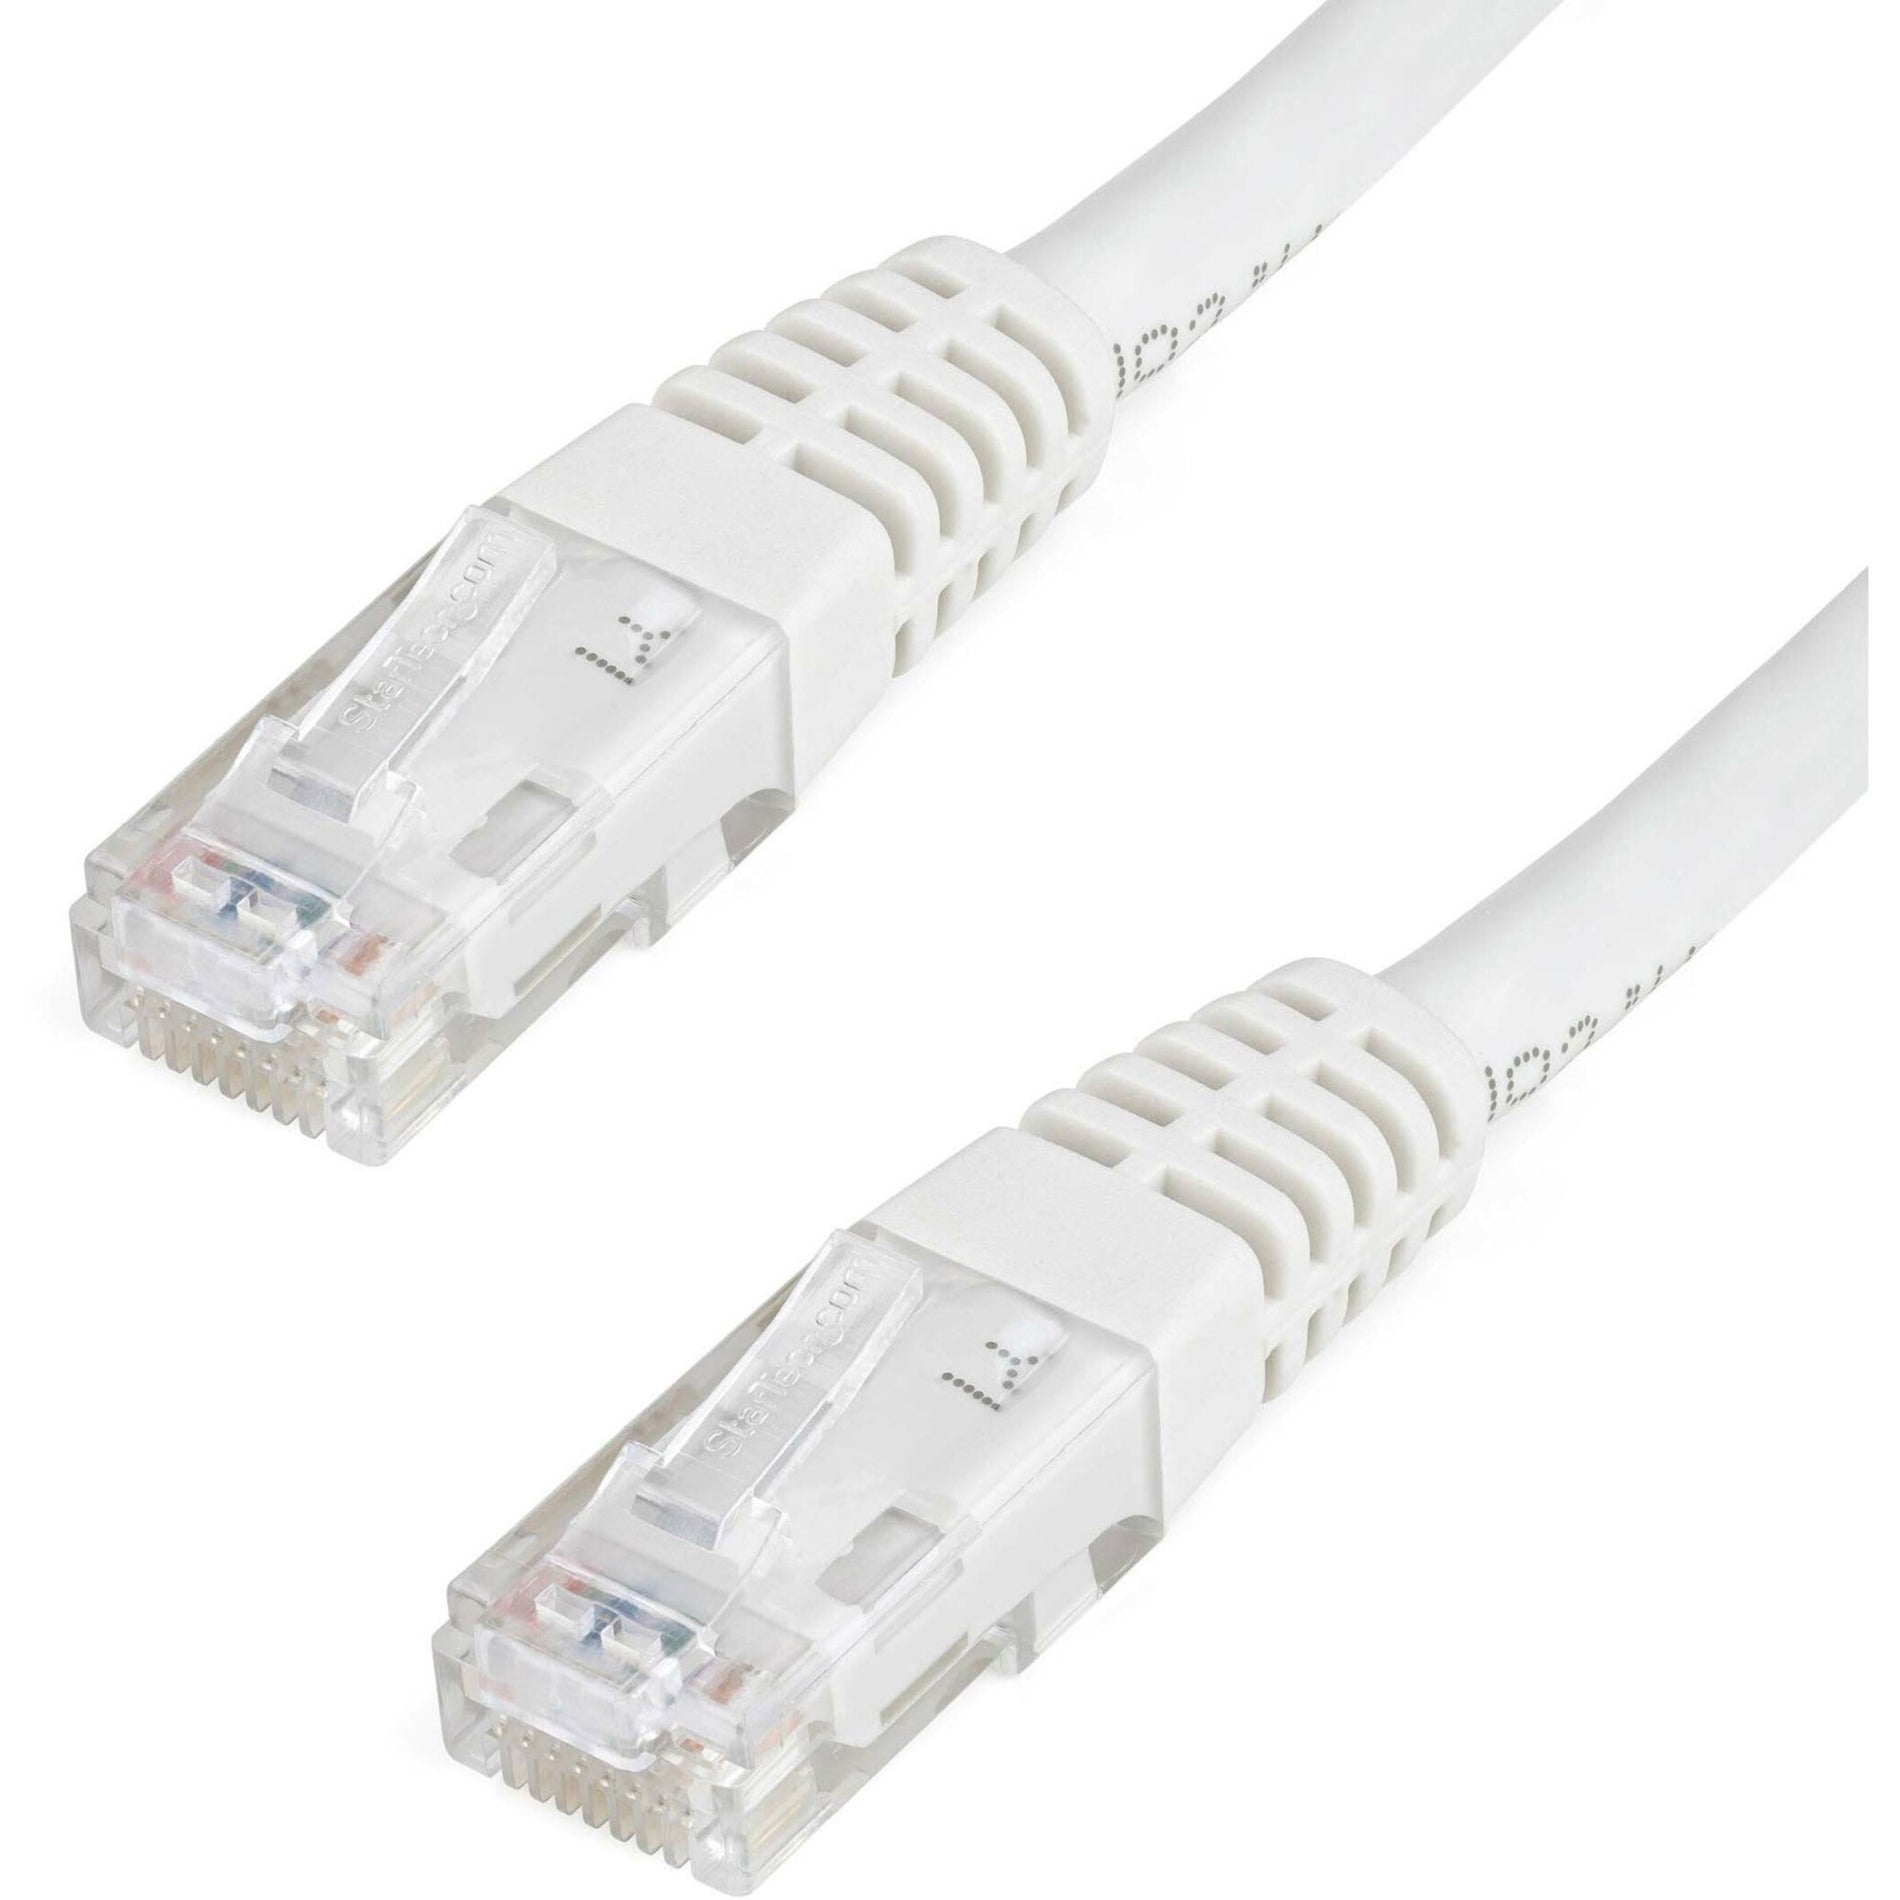 StarTech.com C6PATCH5WH 5ft White Cat6 UTP Patch Cable ETL Verified, Corrosion Resistant, Bend Resistant, PoE++, Stranded, Strain Relief, Damage Resistant, Molded, PoE